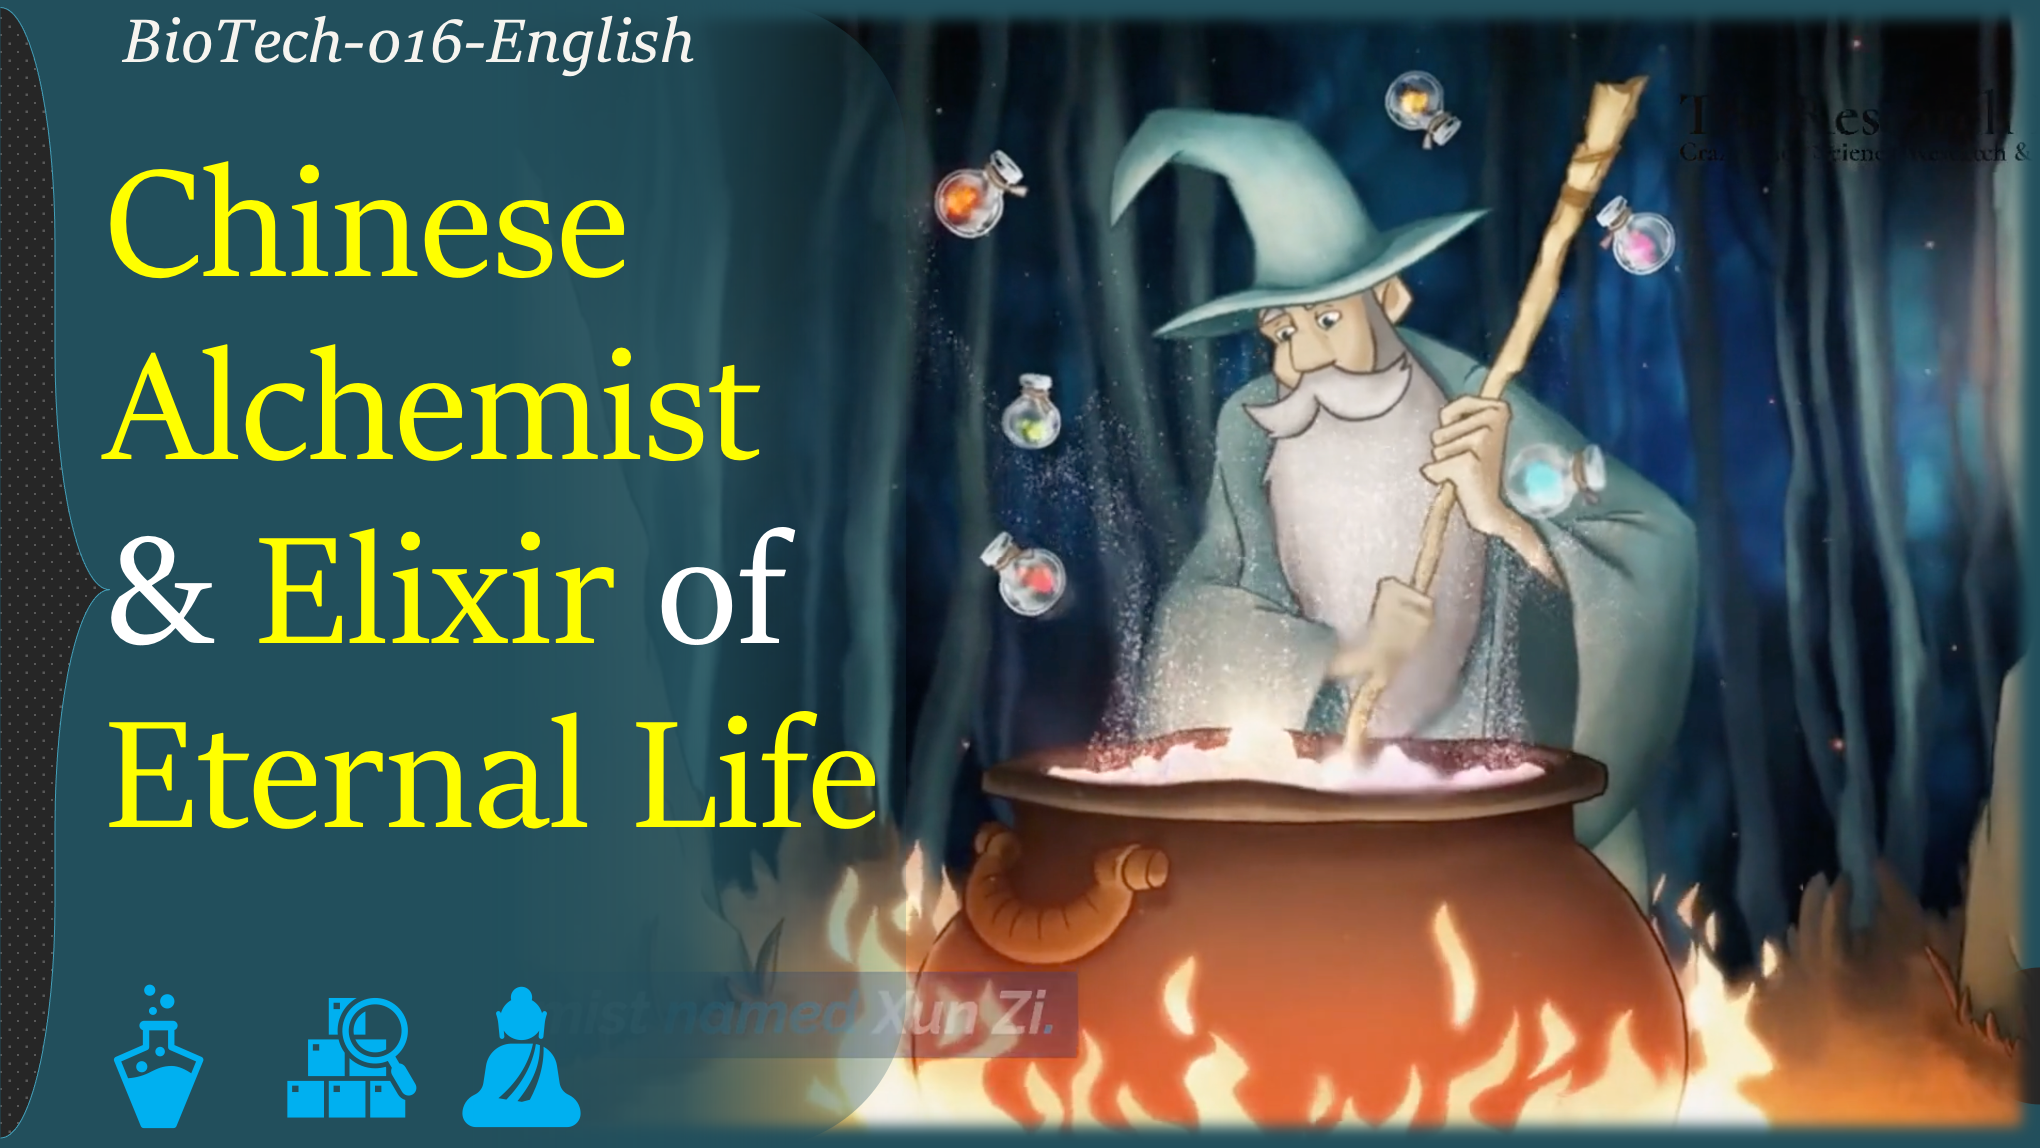 Chinese alchemist found a destroyer in pursuit of Elixir of Eternal Life